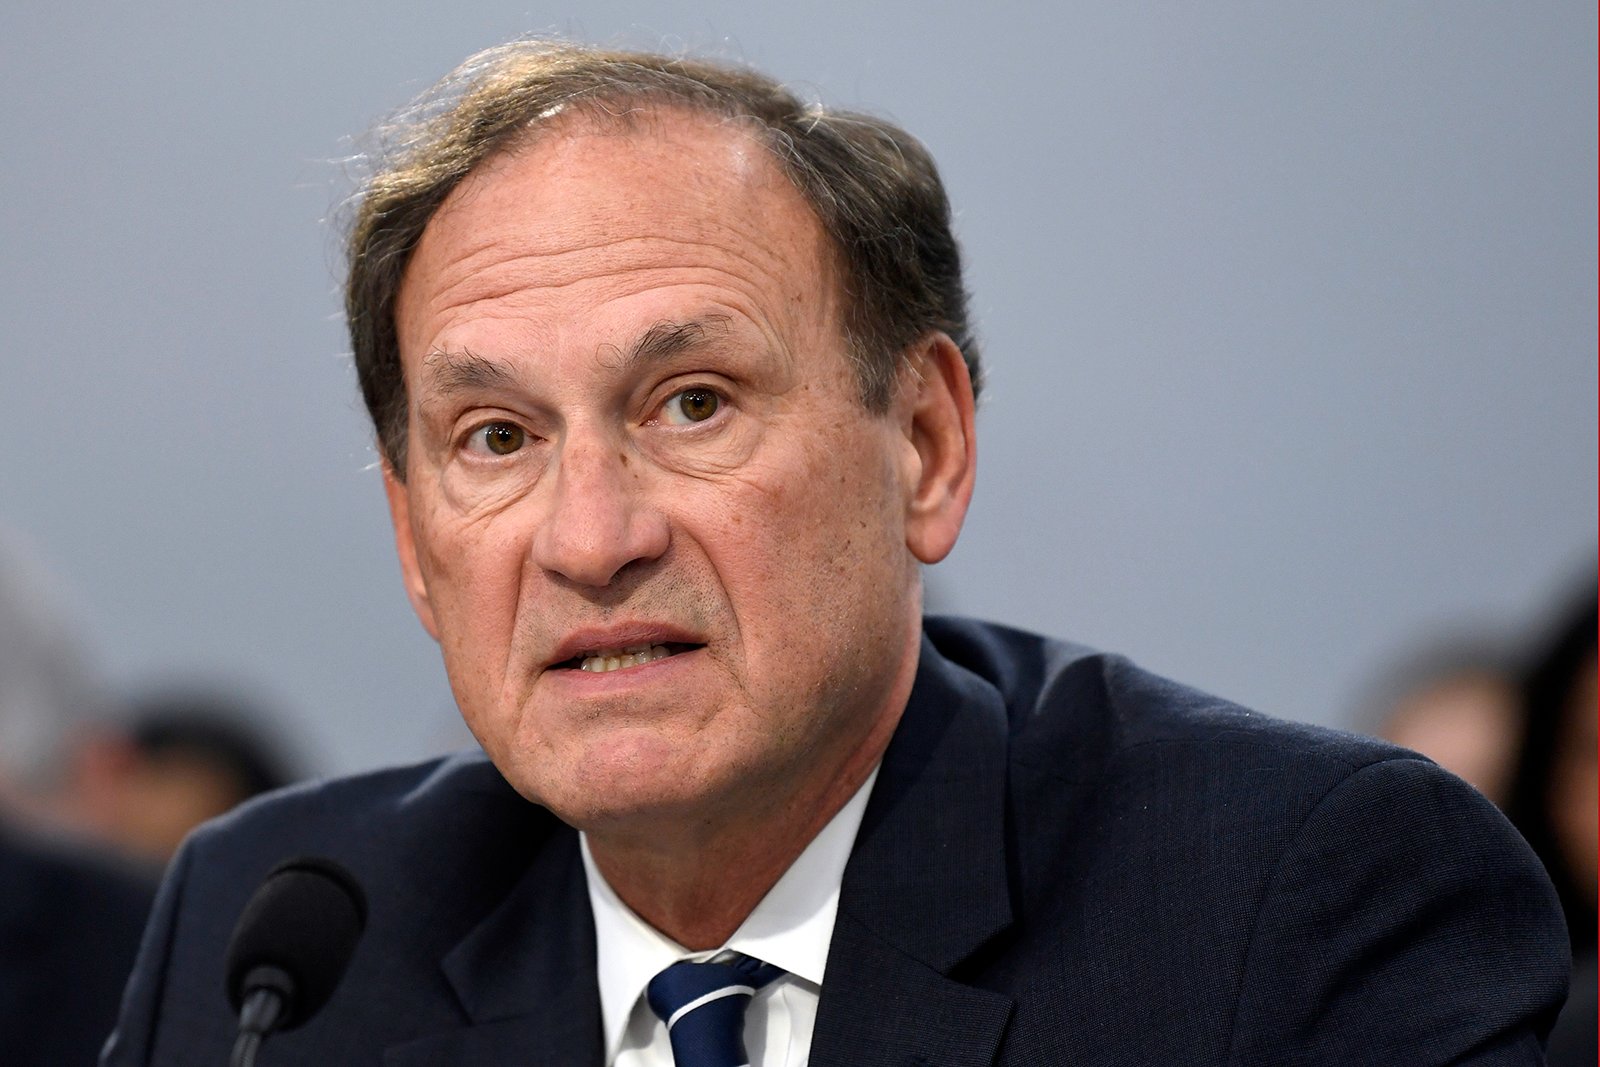 Alito argues that religious bias is better than any other kind